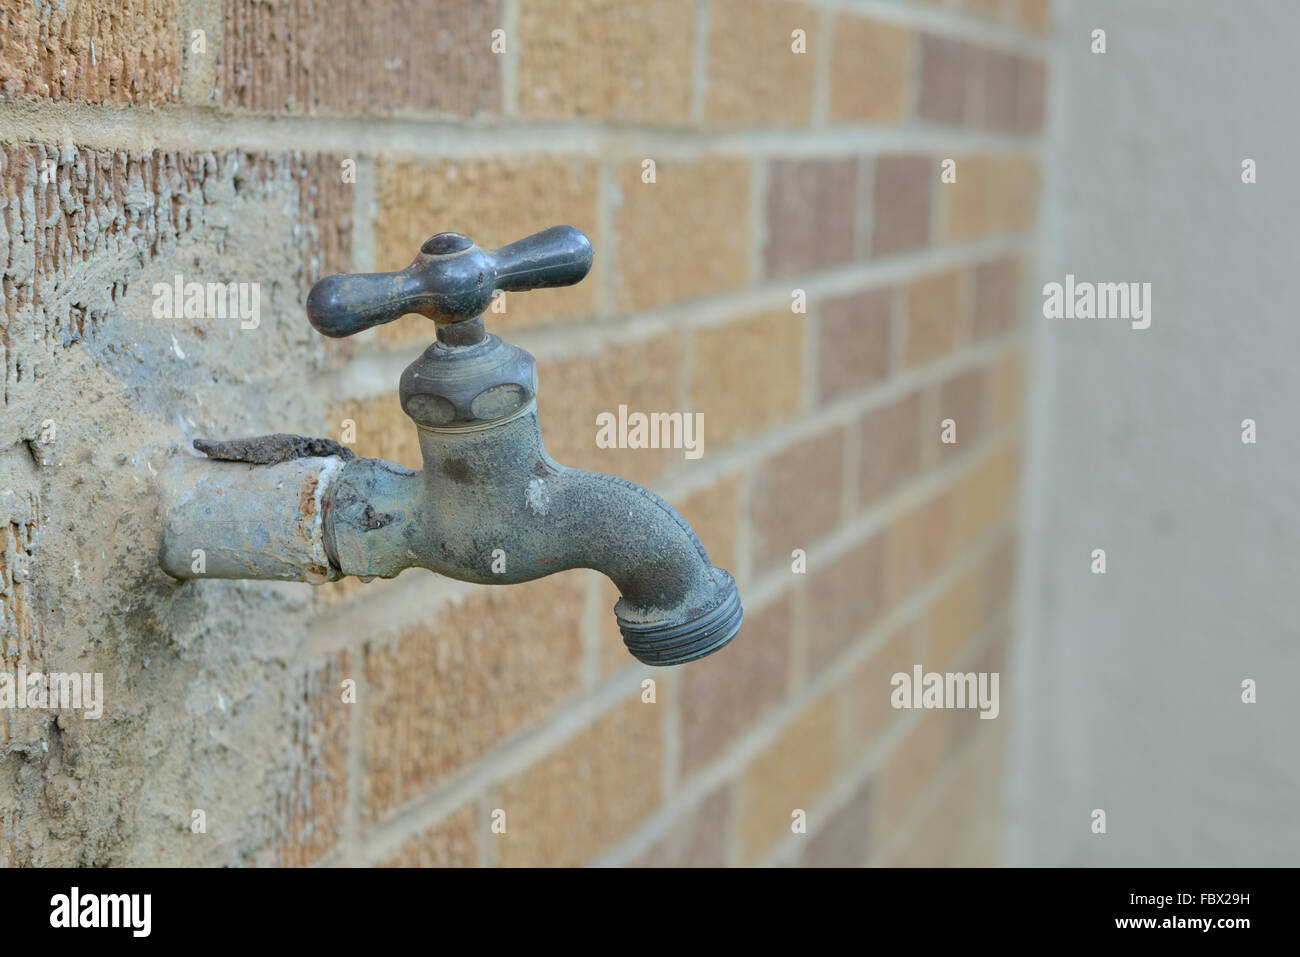 Old faucet made of brass attached to brick wall Stock Photo